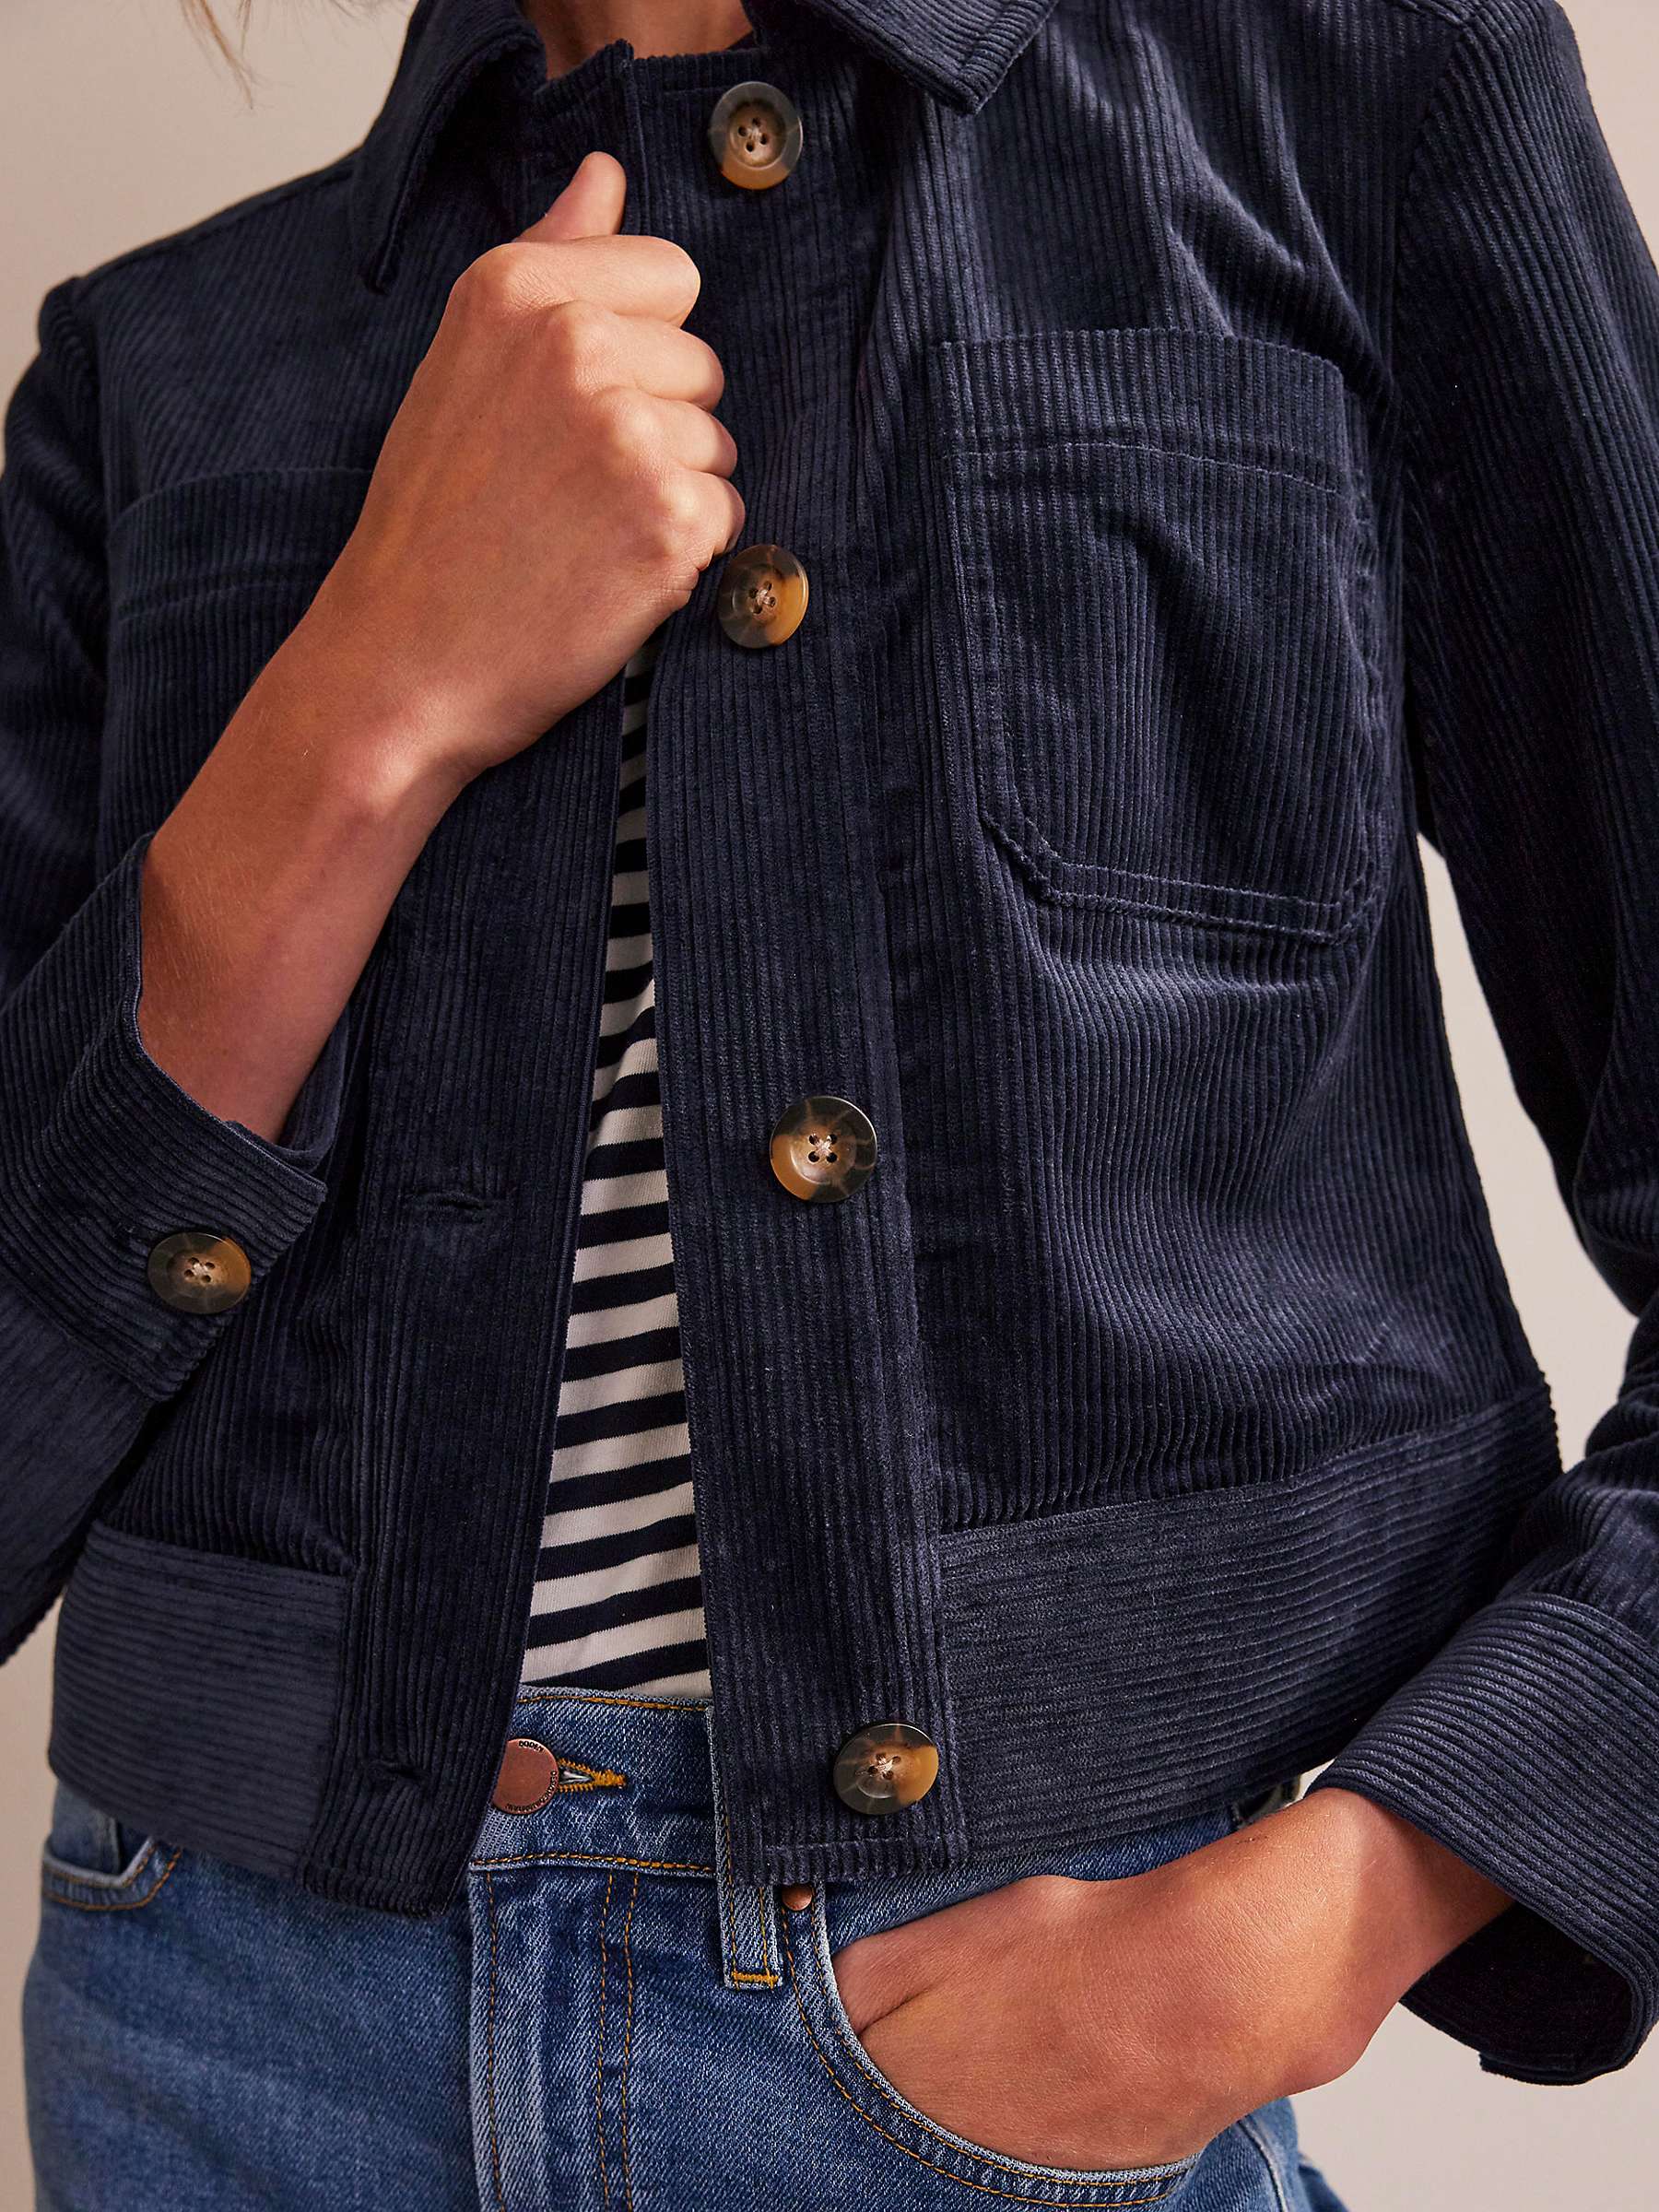 Buy Boden Boxy Cord Jacket Online at johnlewis.com